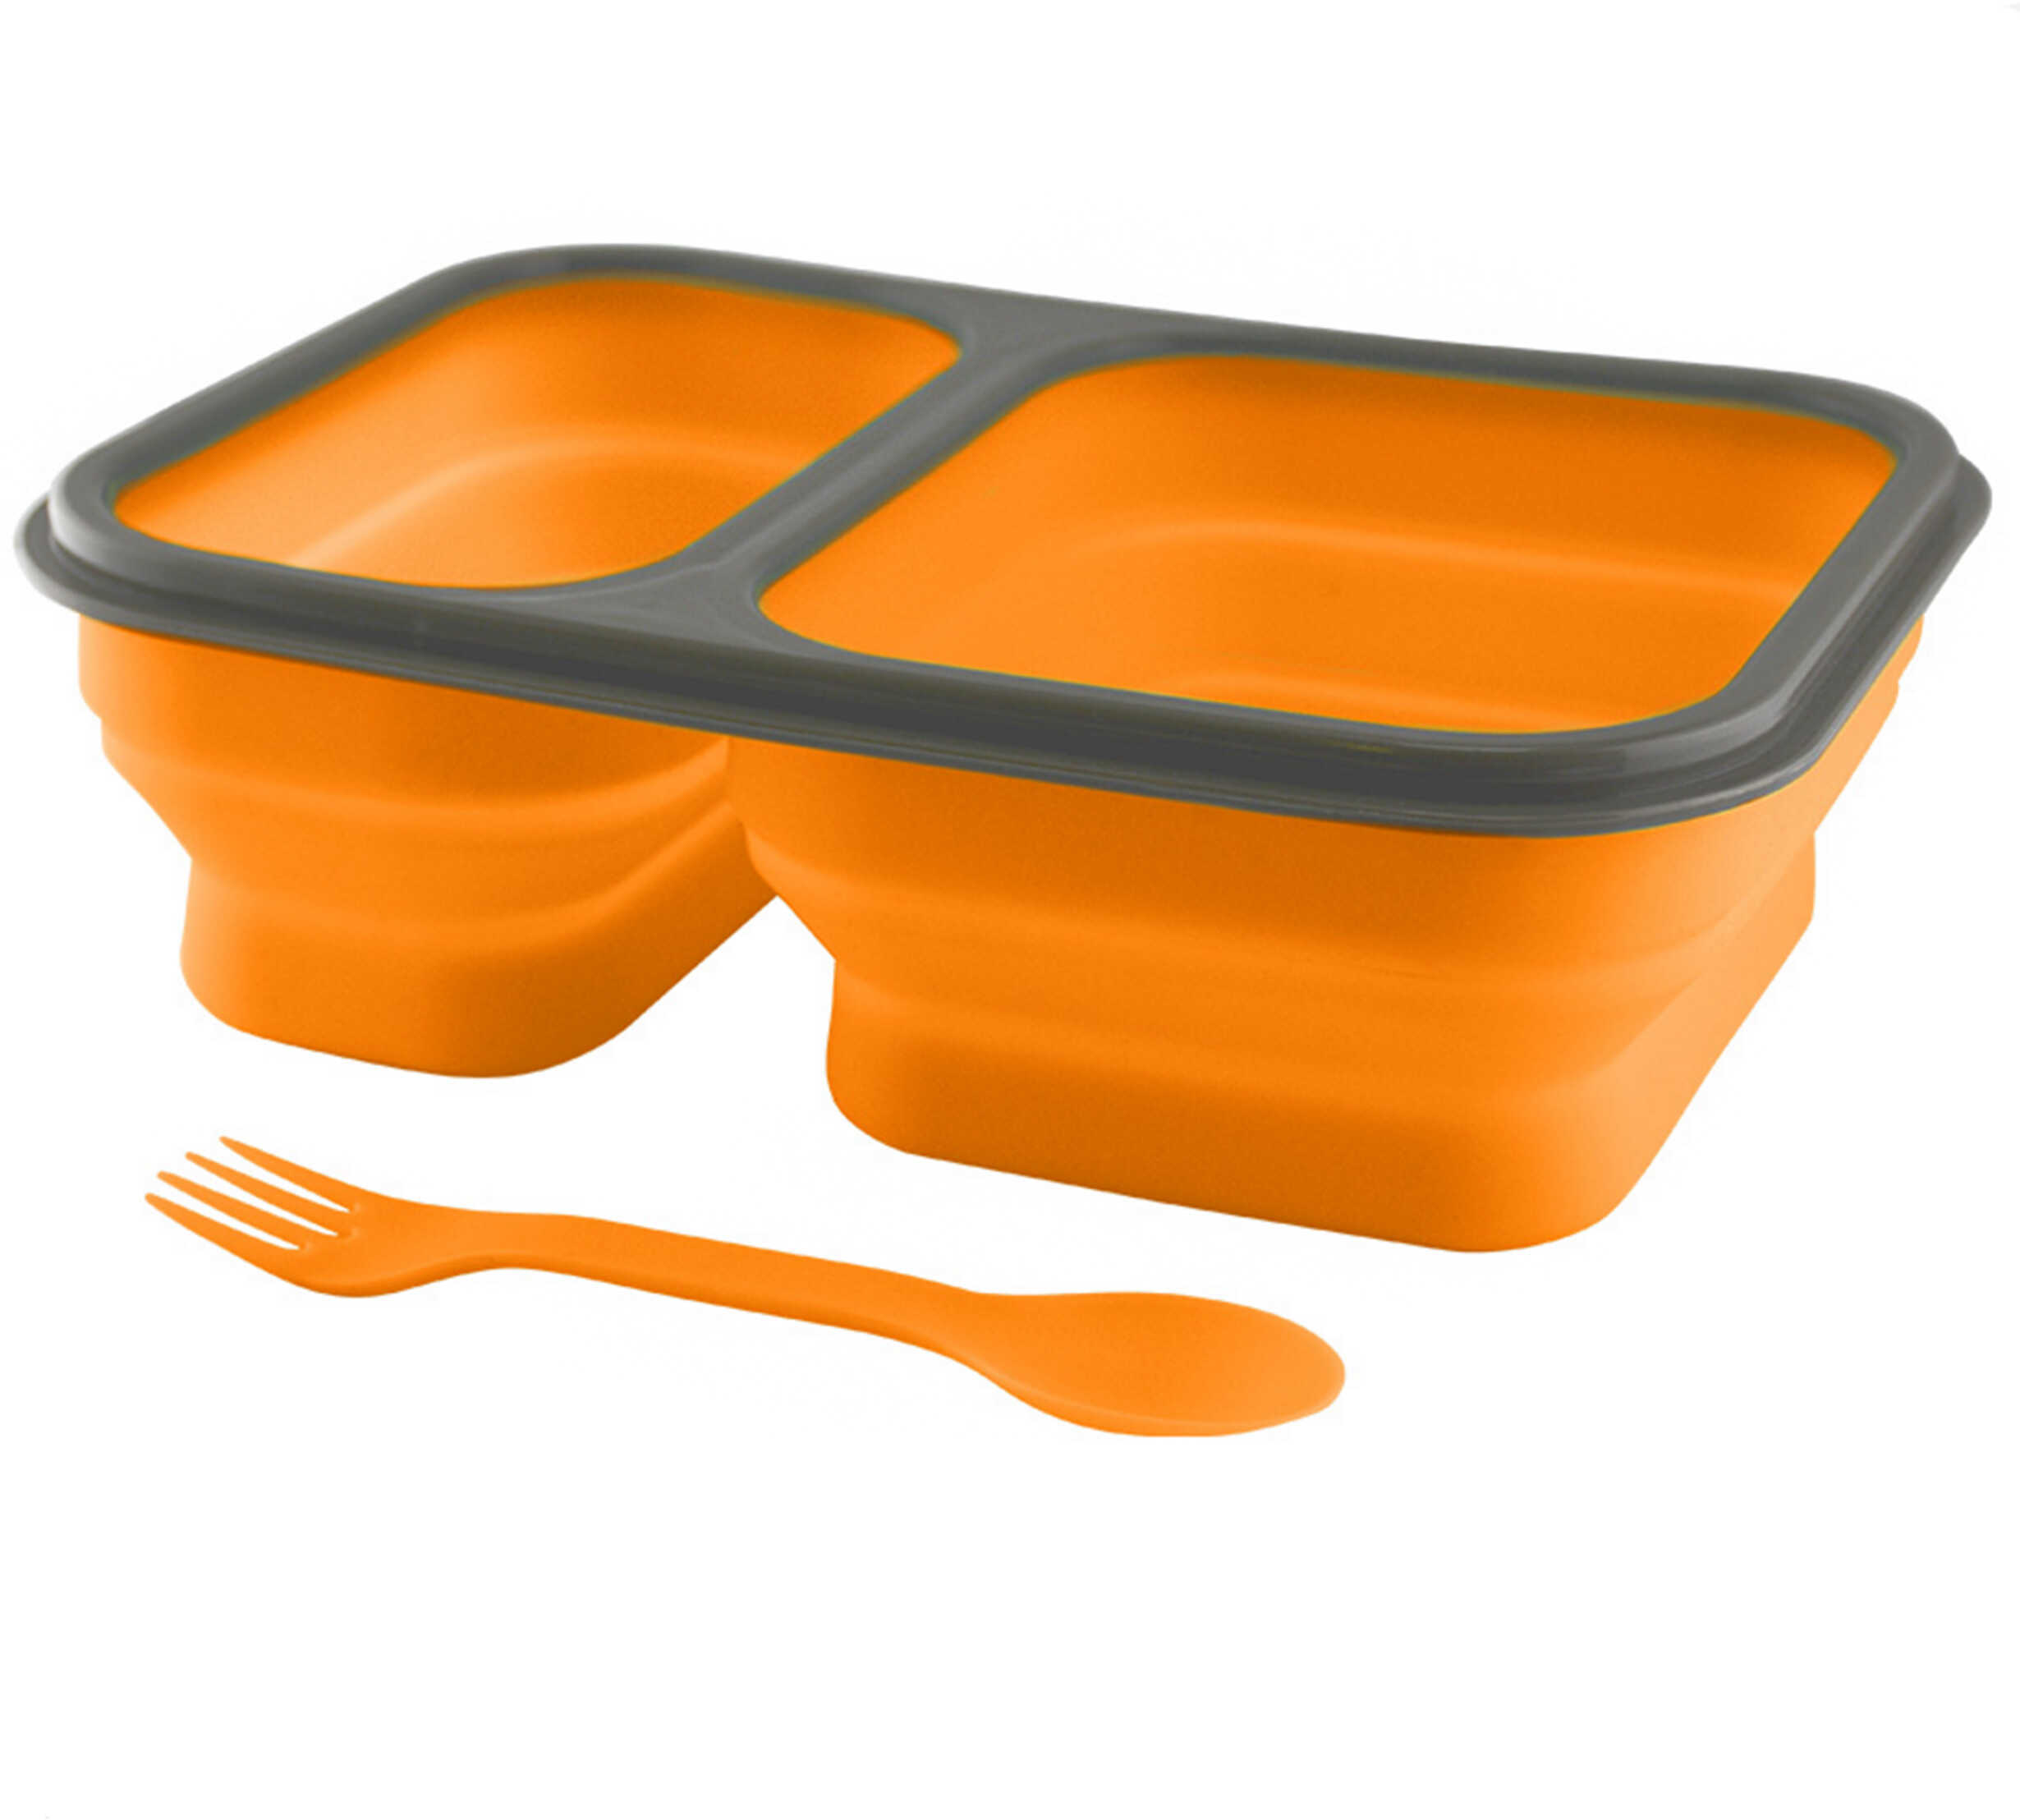 UST - Ultimate Survival Technologies FlexWare Mess Kit Orange Collapsible 2.75"x8.4"x5.9" Extended Peggable Box Packagin